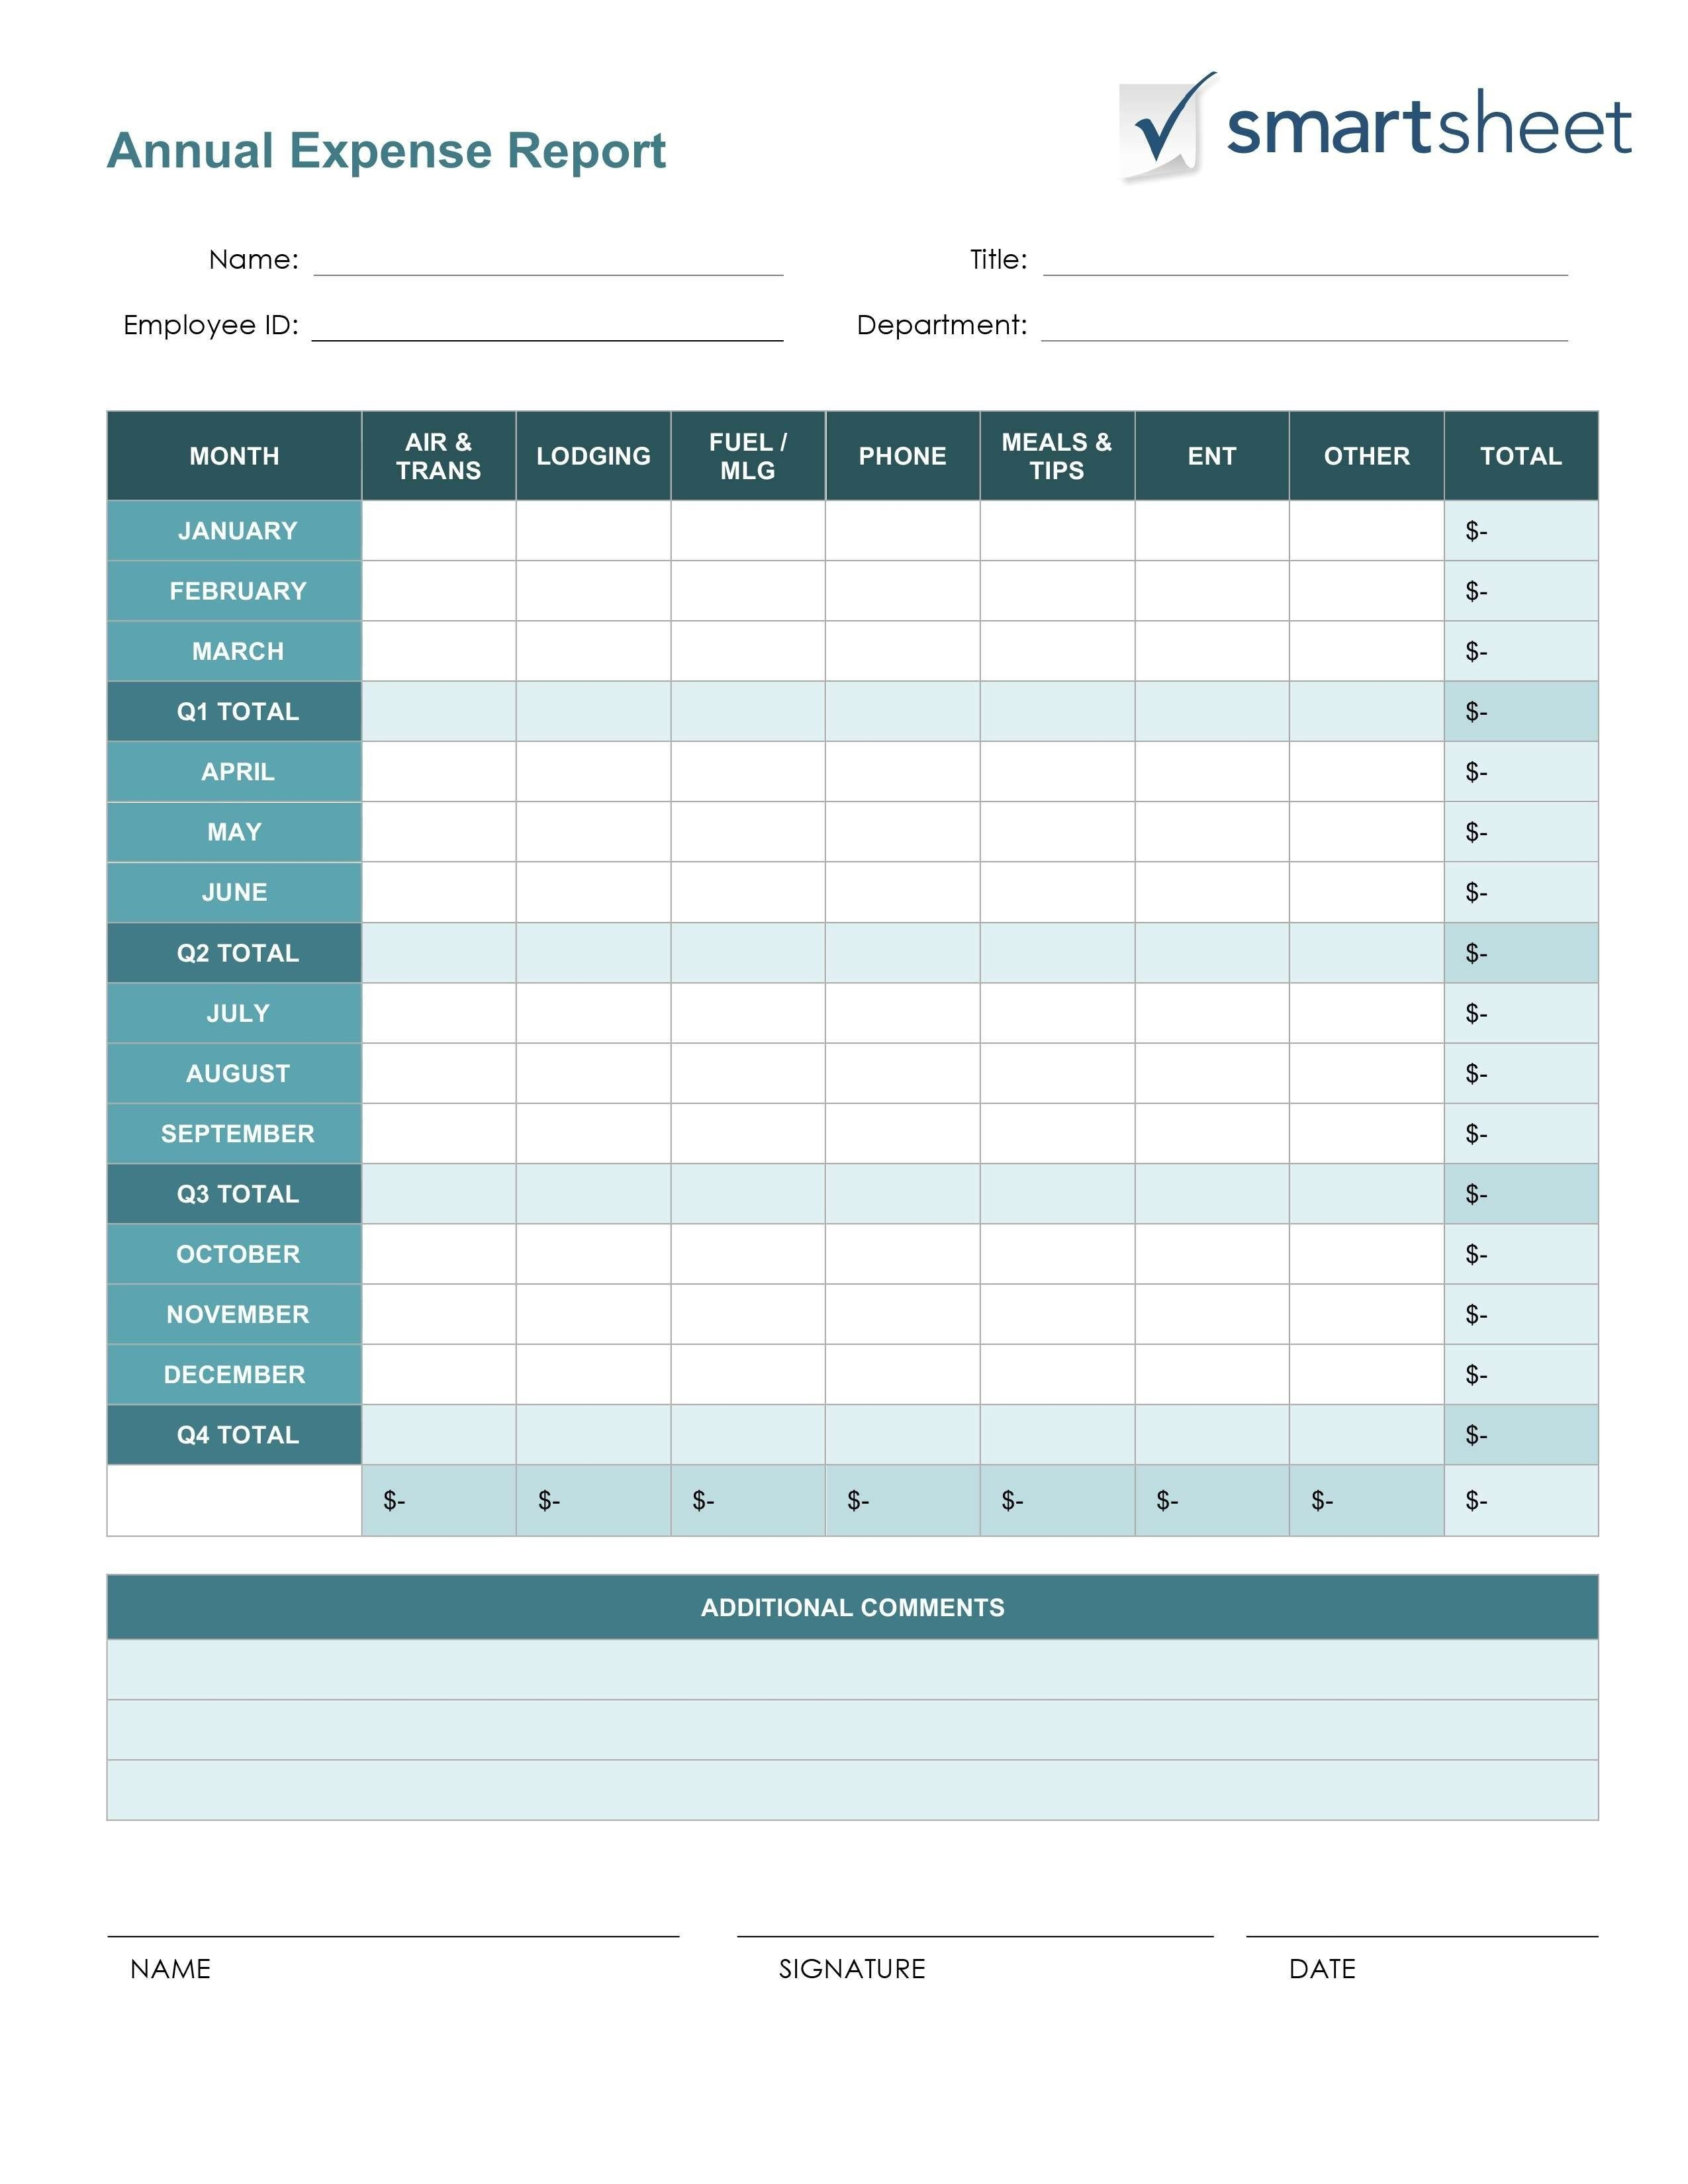 New Expenses Excel #exceltemplate #xls #xlstemplate Pertaining To Expense Report Spreadsheet Template